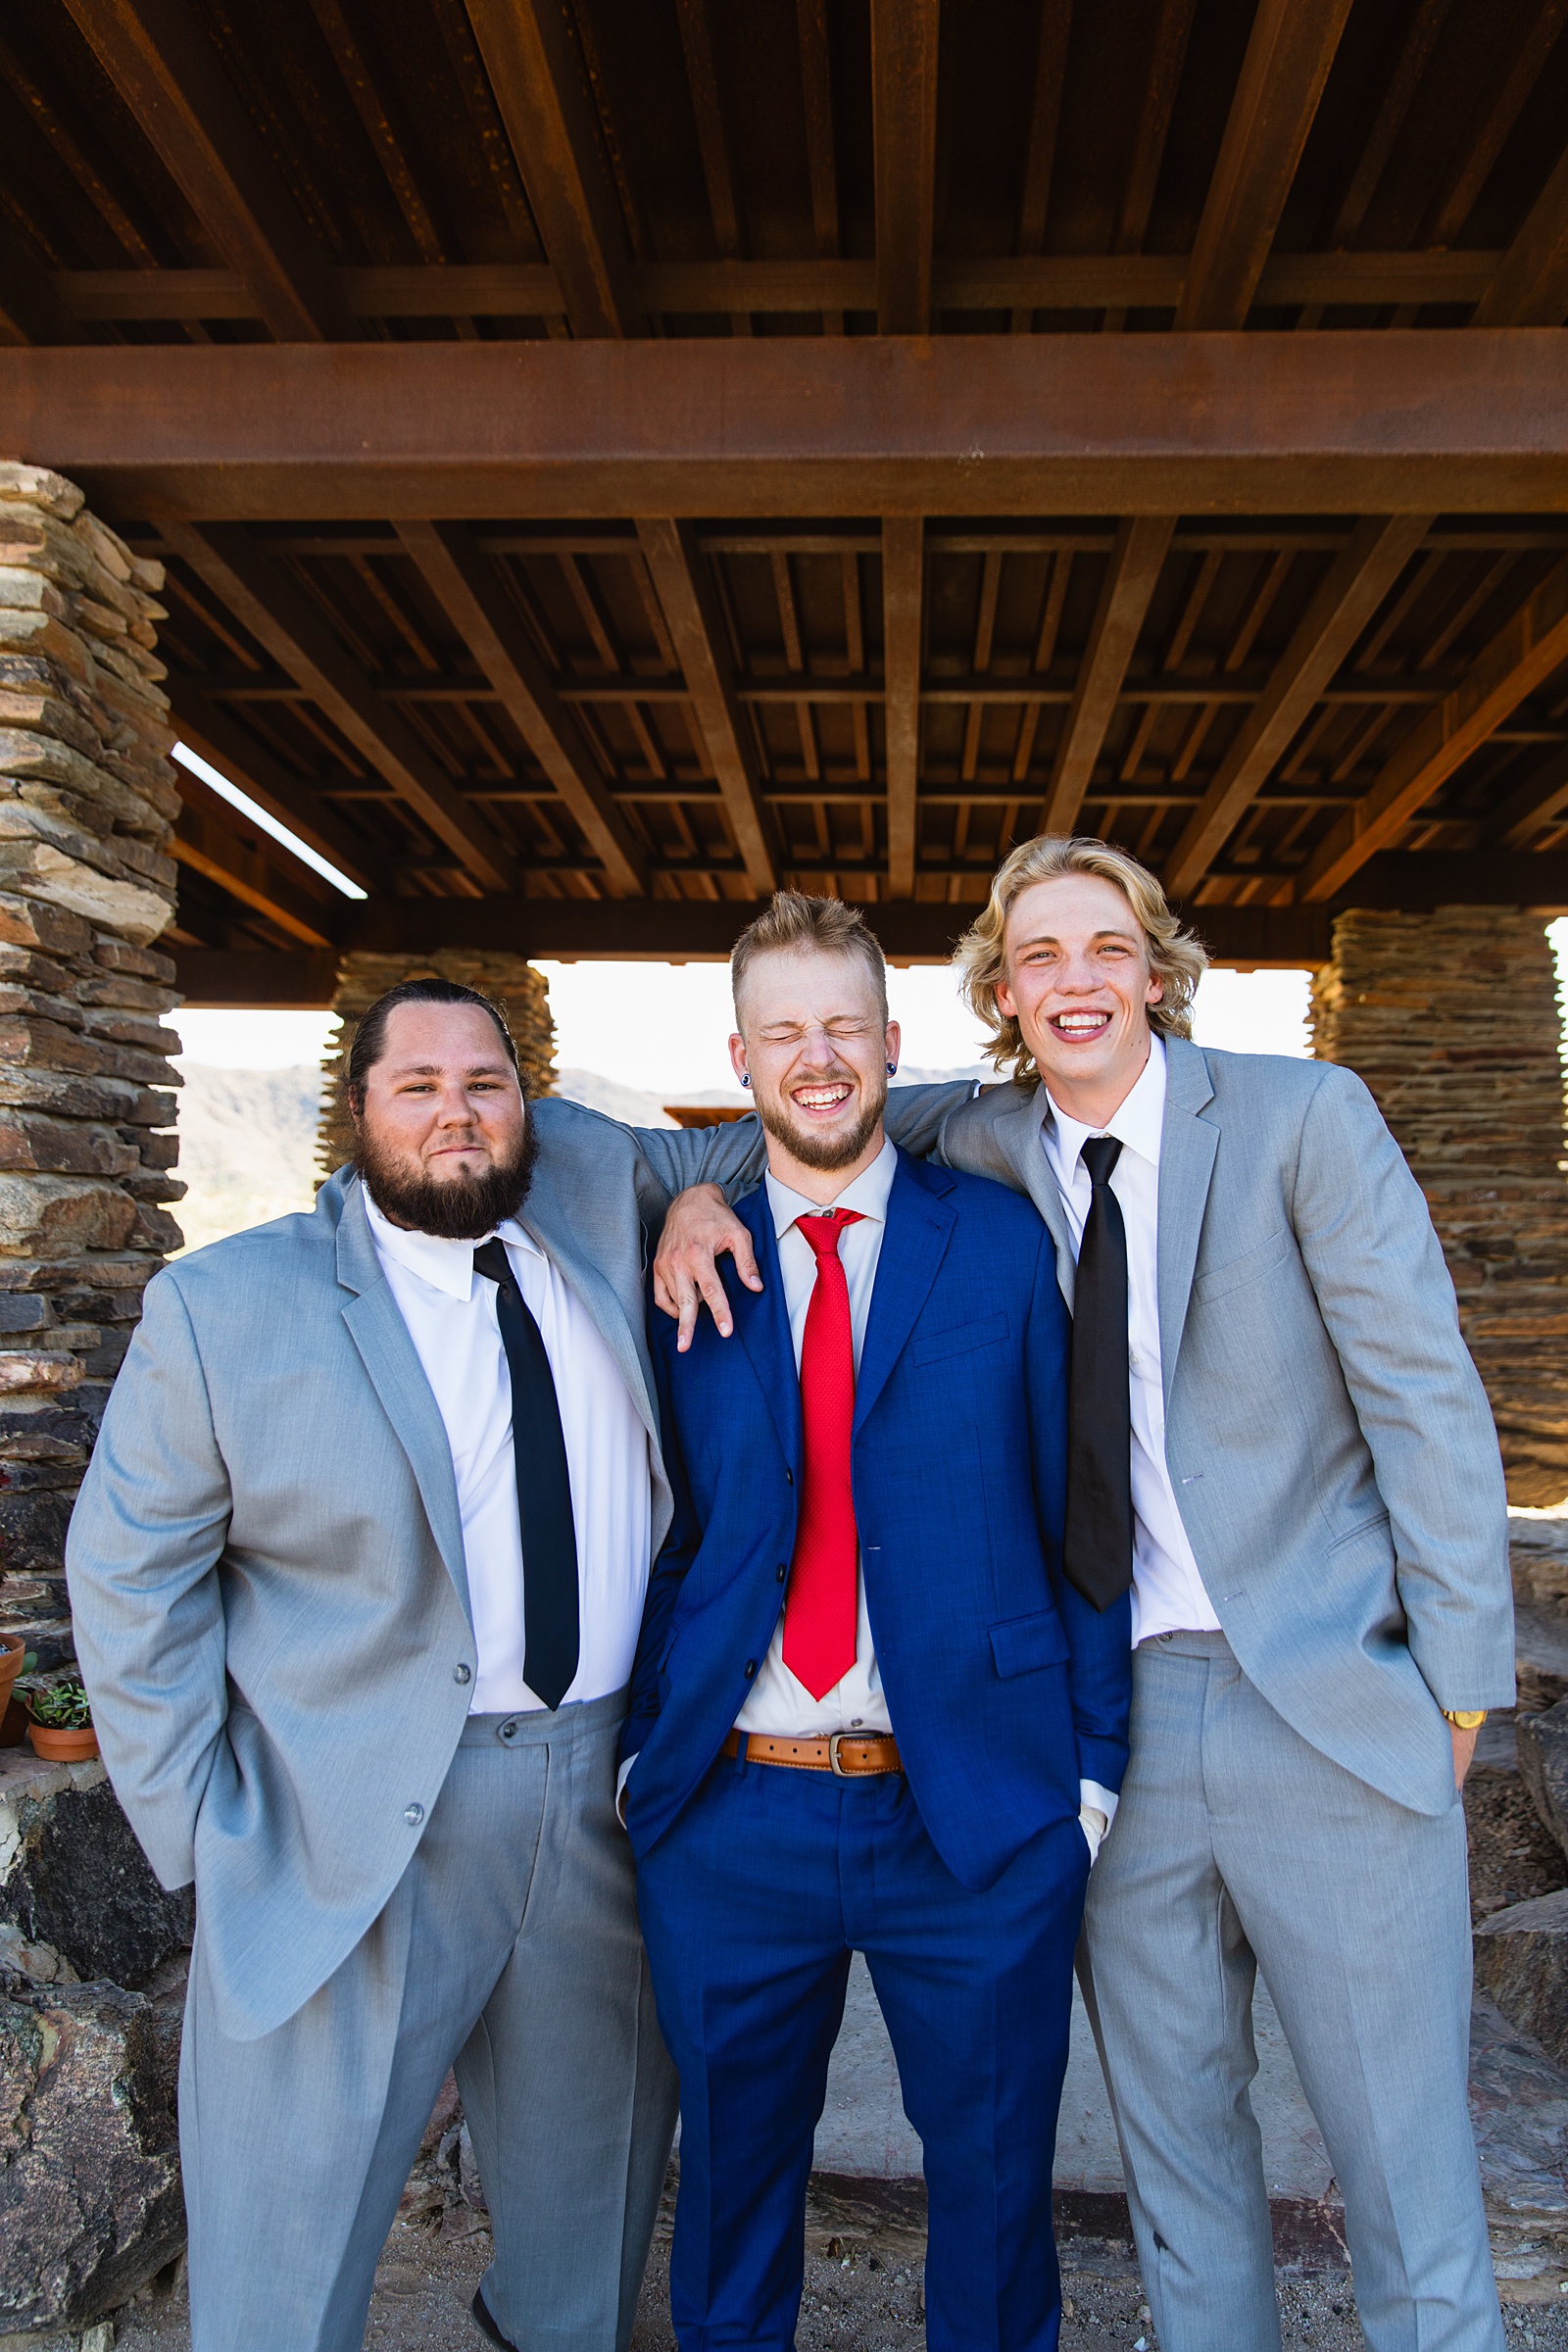 Groom and groomsmen laughing together at intimate desert wedding by Phoenix wedding photographer Juniper and Co Photography.